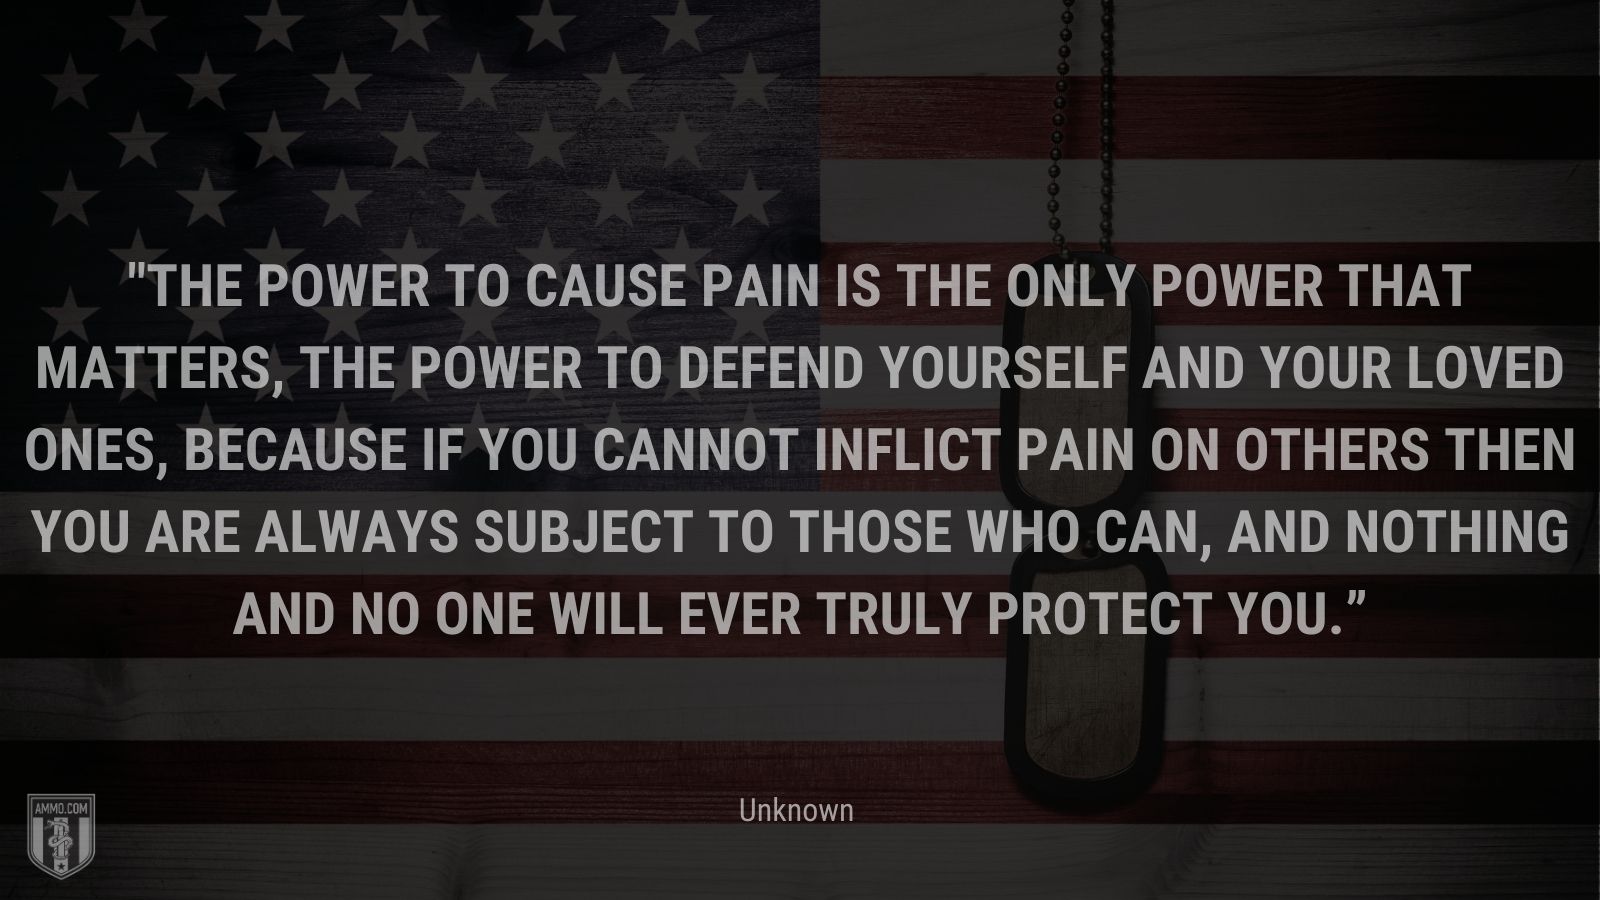 “The power to cause pain is the only power that matters, the power to defend yourself and your loved ones, because if you cannot inflict pain on others then you are always subject to those who can, and nothing and no one will ever truly protect you.” - Unknown